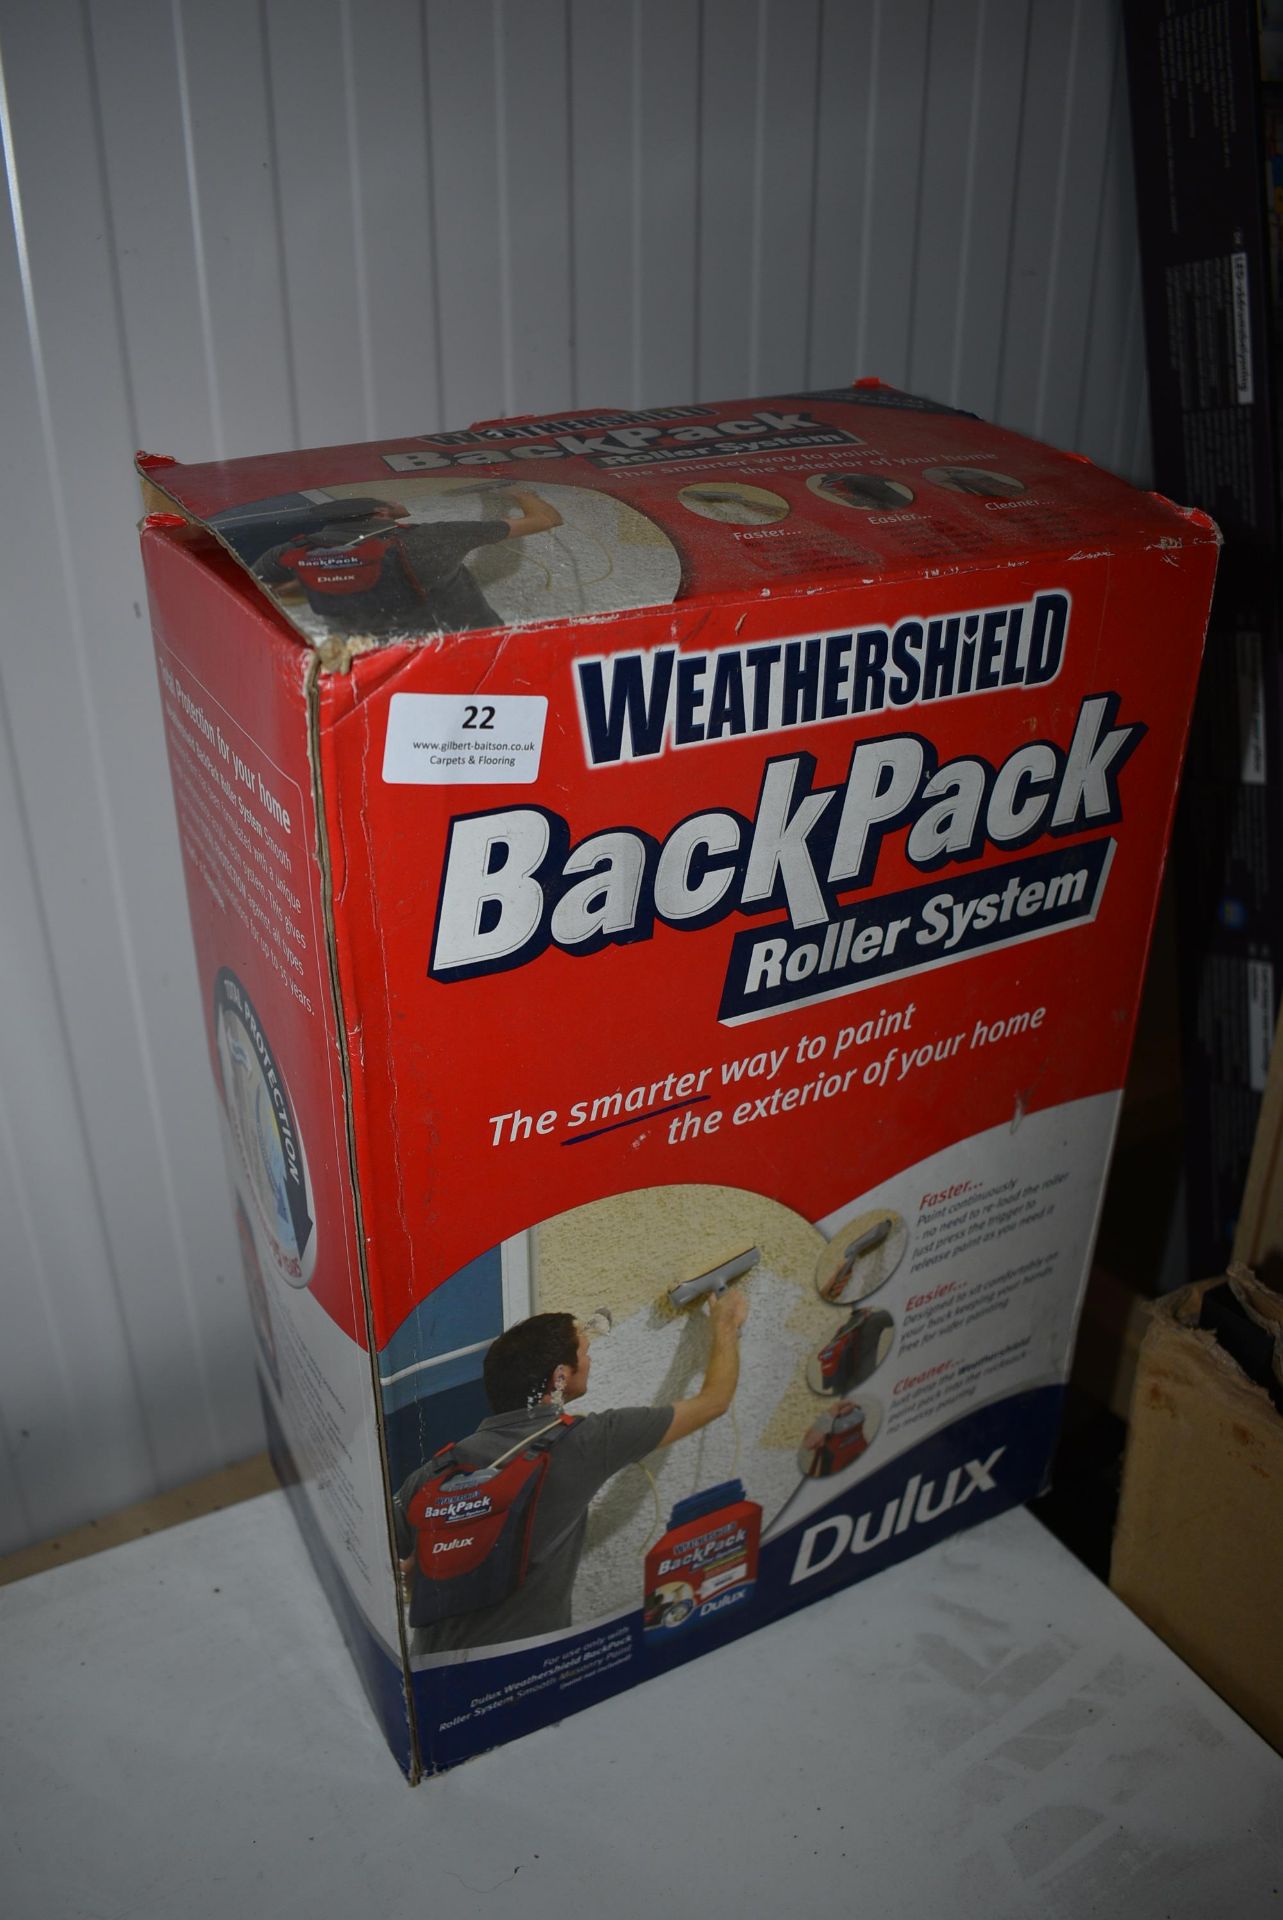 Dulux Weathershield Backpack Roller System